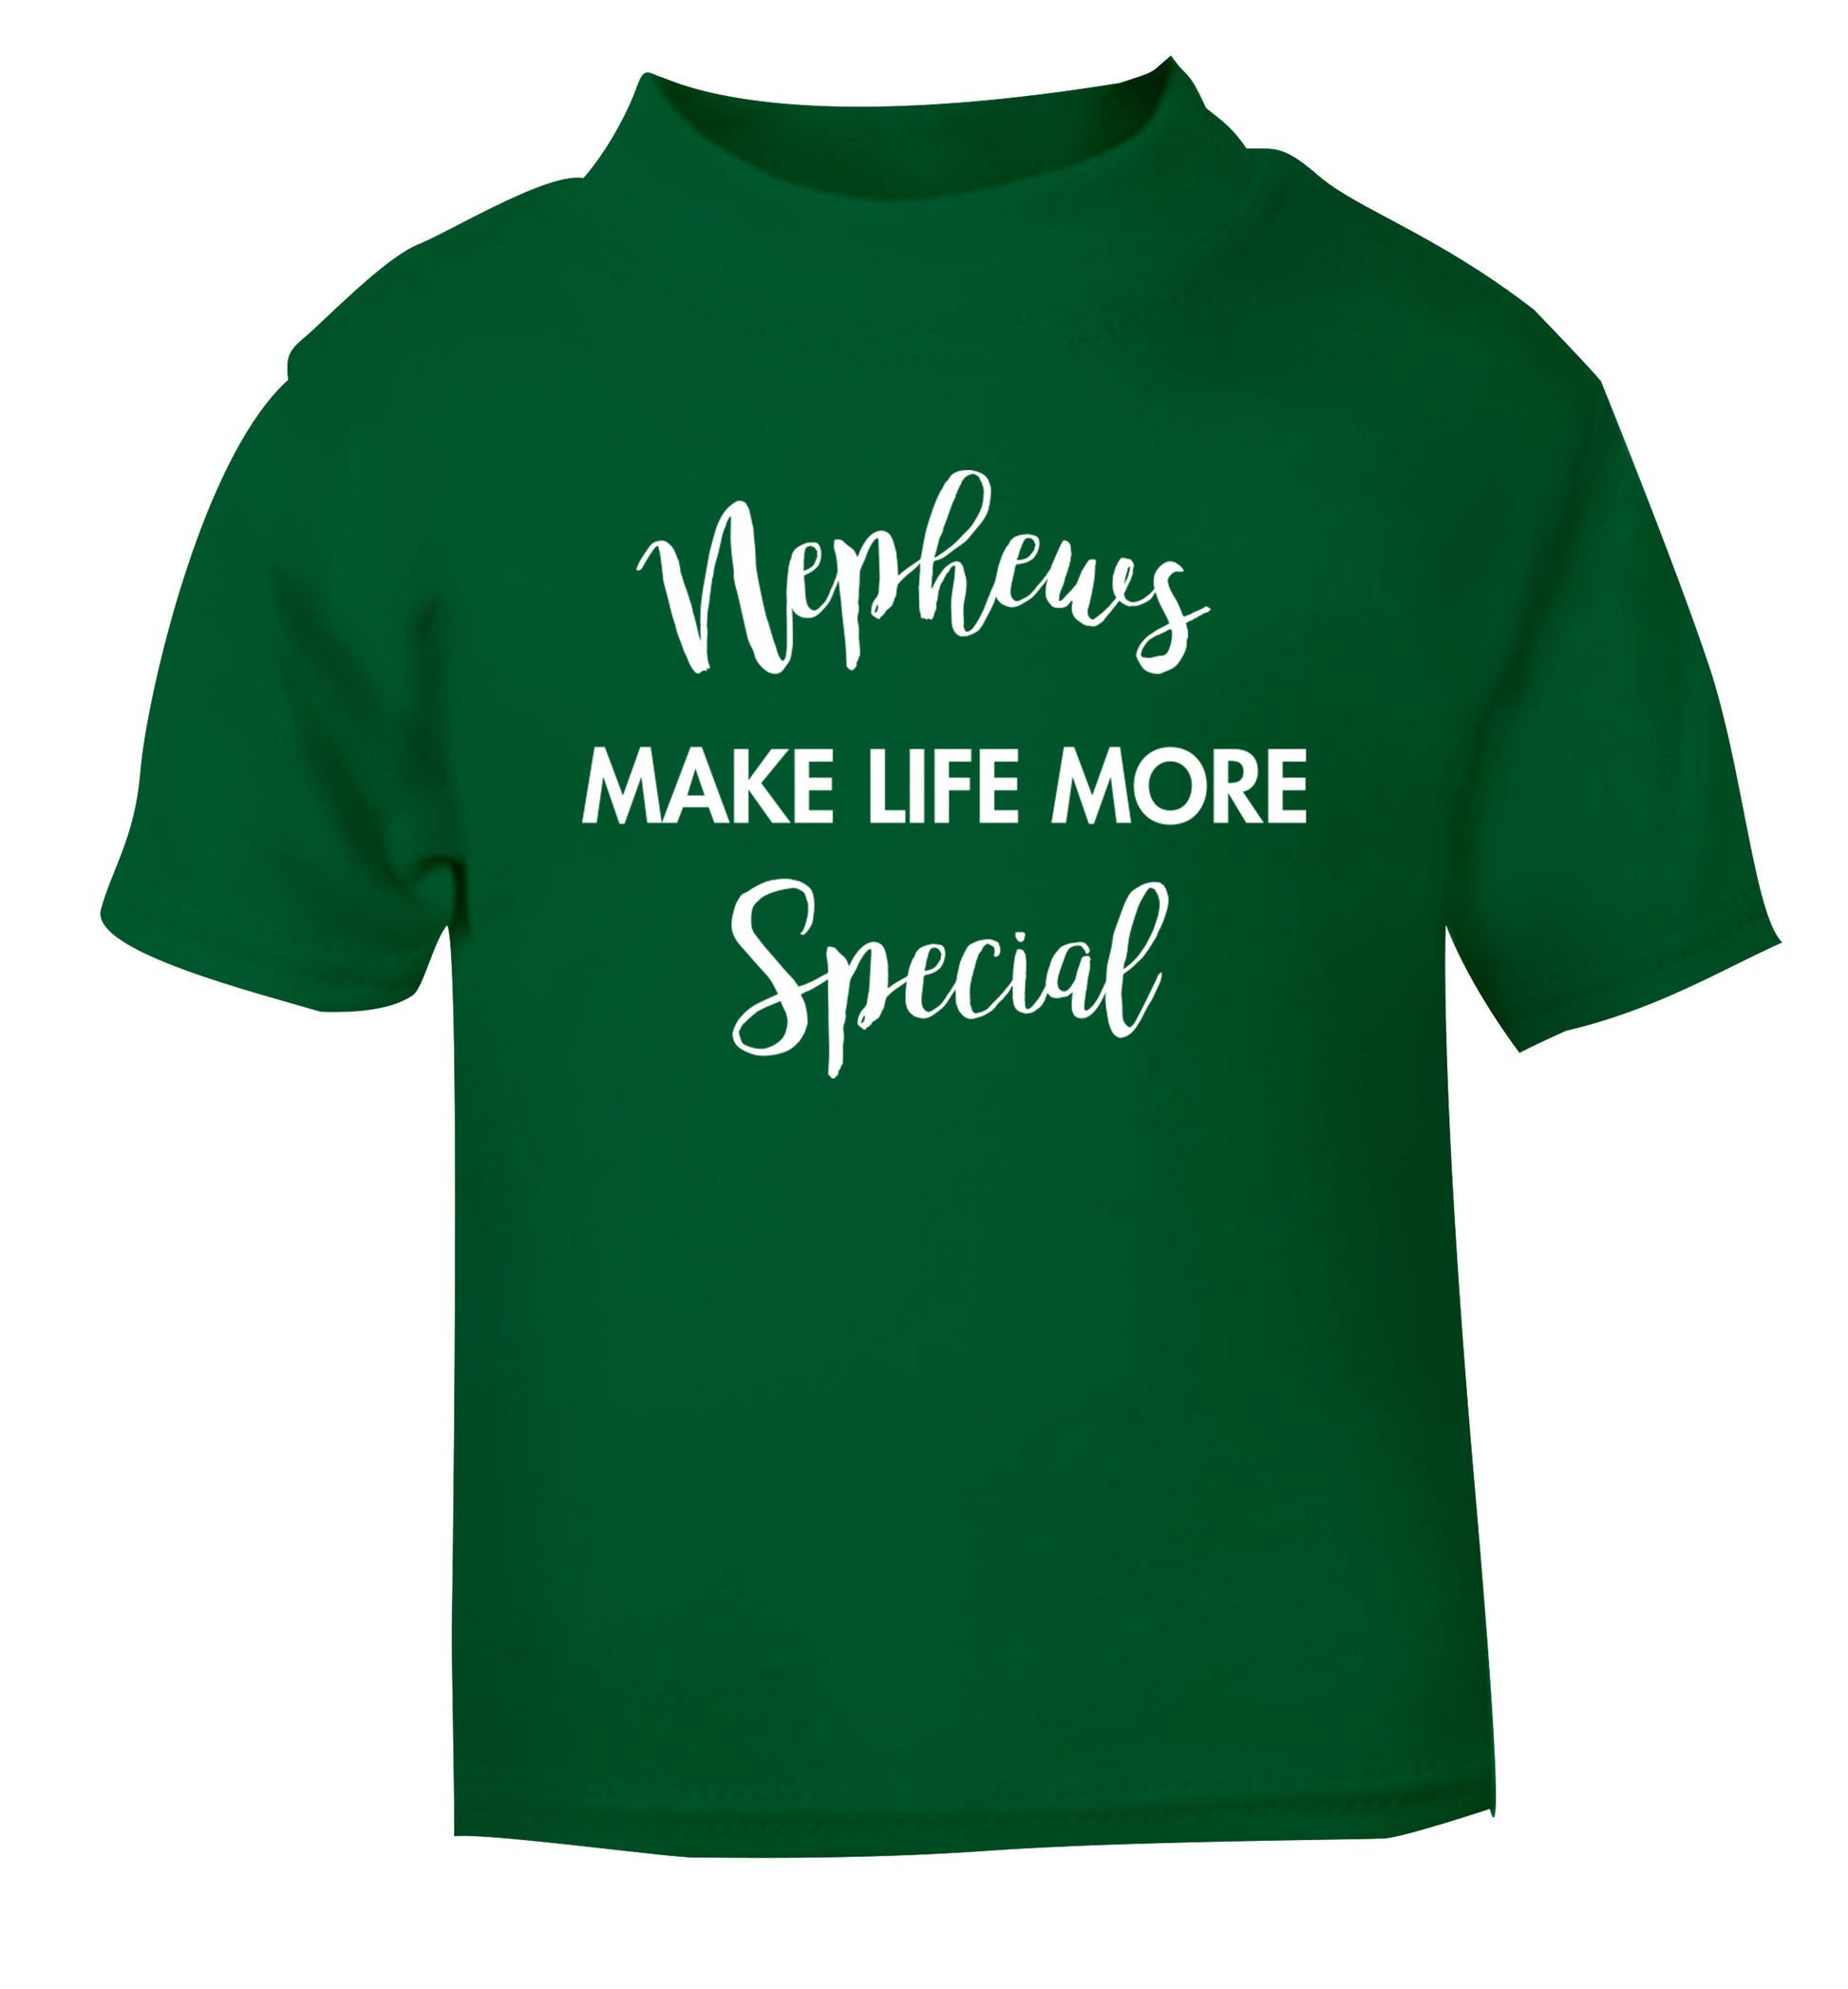 Nephews make life more special green Baby Toddler Tshirt 2 Years